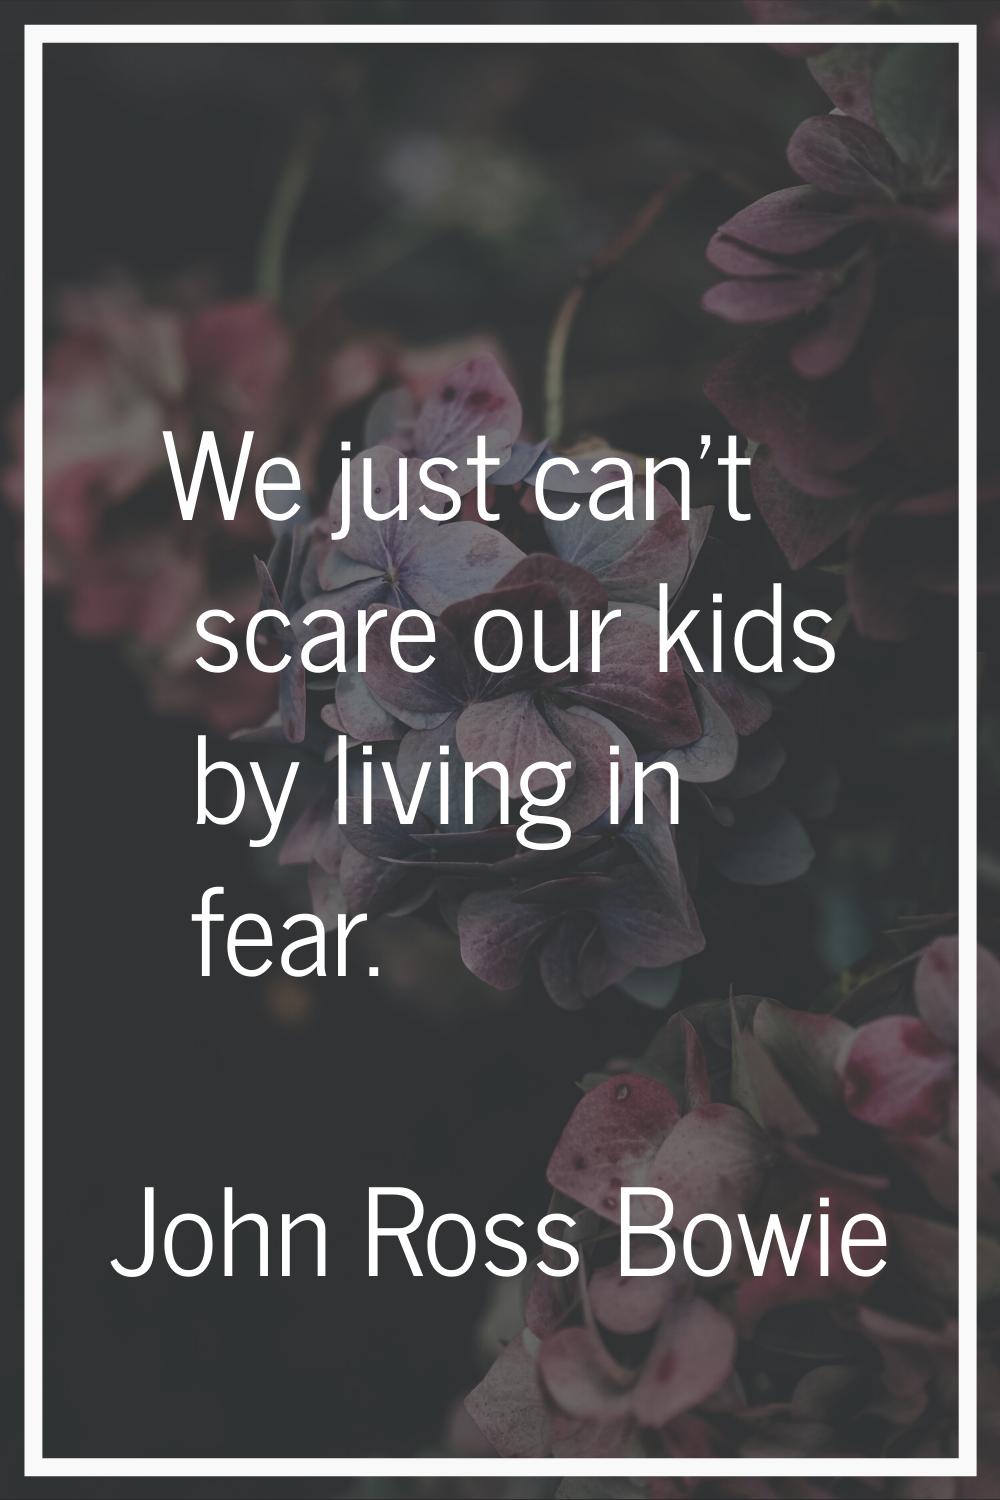 We just can't scare our kids by living in fear.